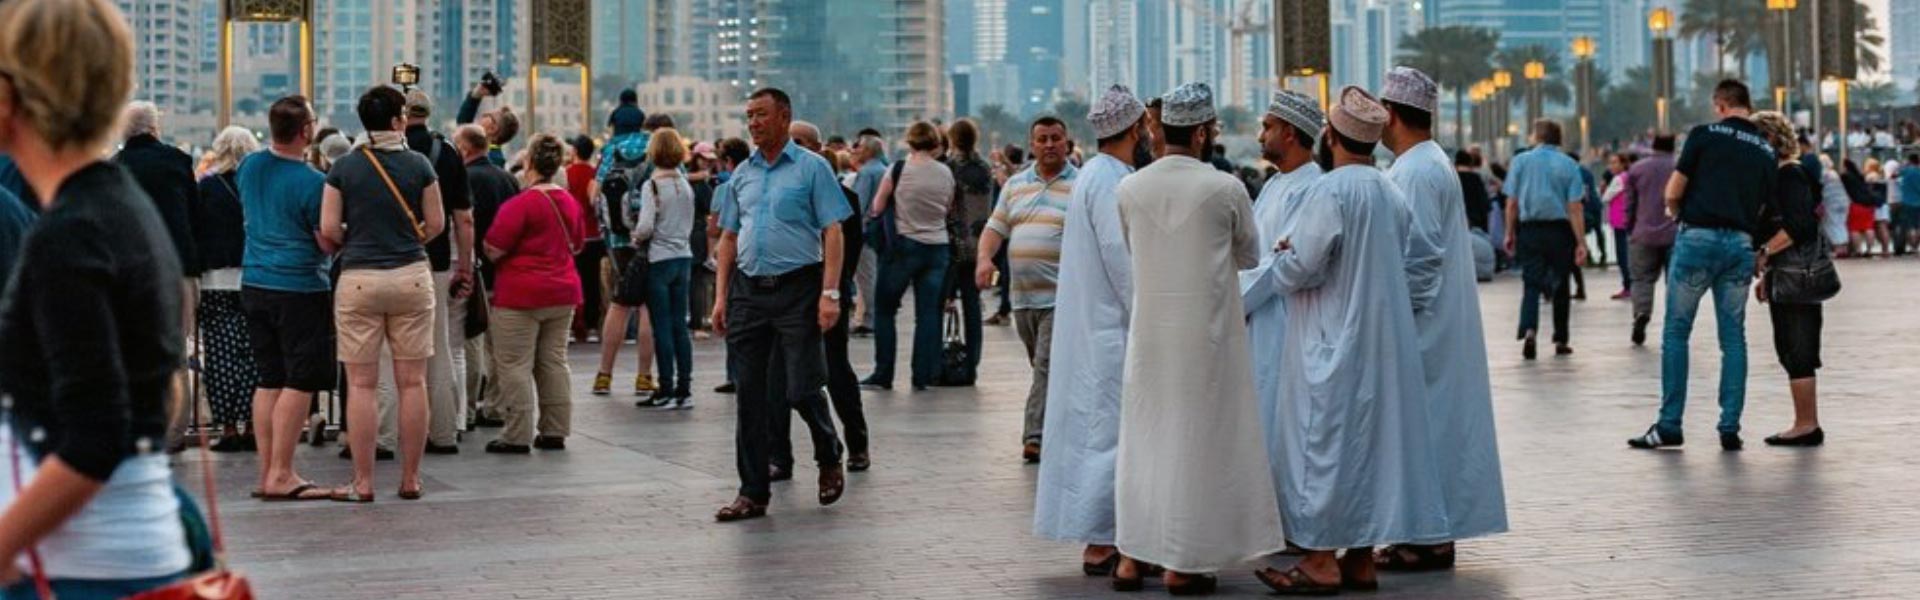 Church Planting, UAE

FELLOWSHIP DUBAI - PLANTING A CHURCH IN SOUTH ASIA

Fellowship Dubai is an international church, with over 80 nations represented in their Friday services. Many of the nations...
